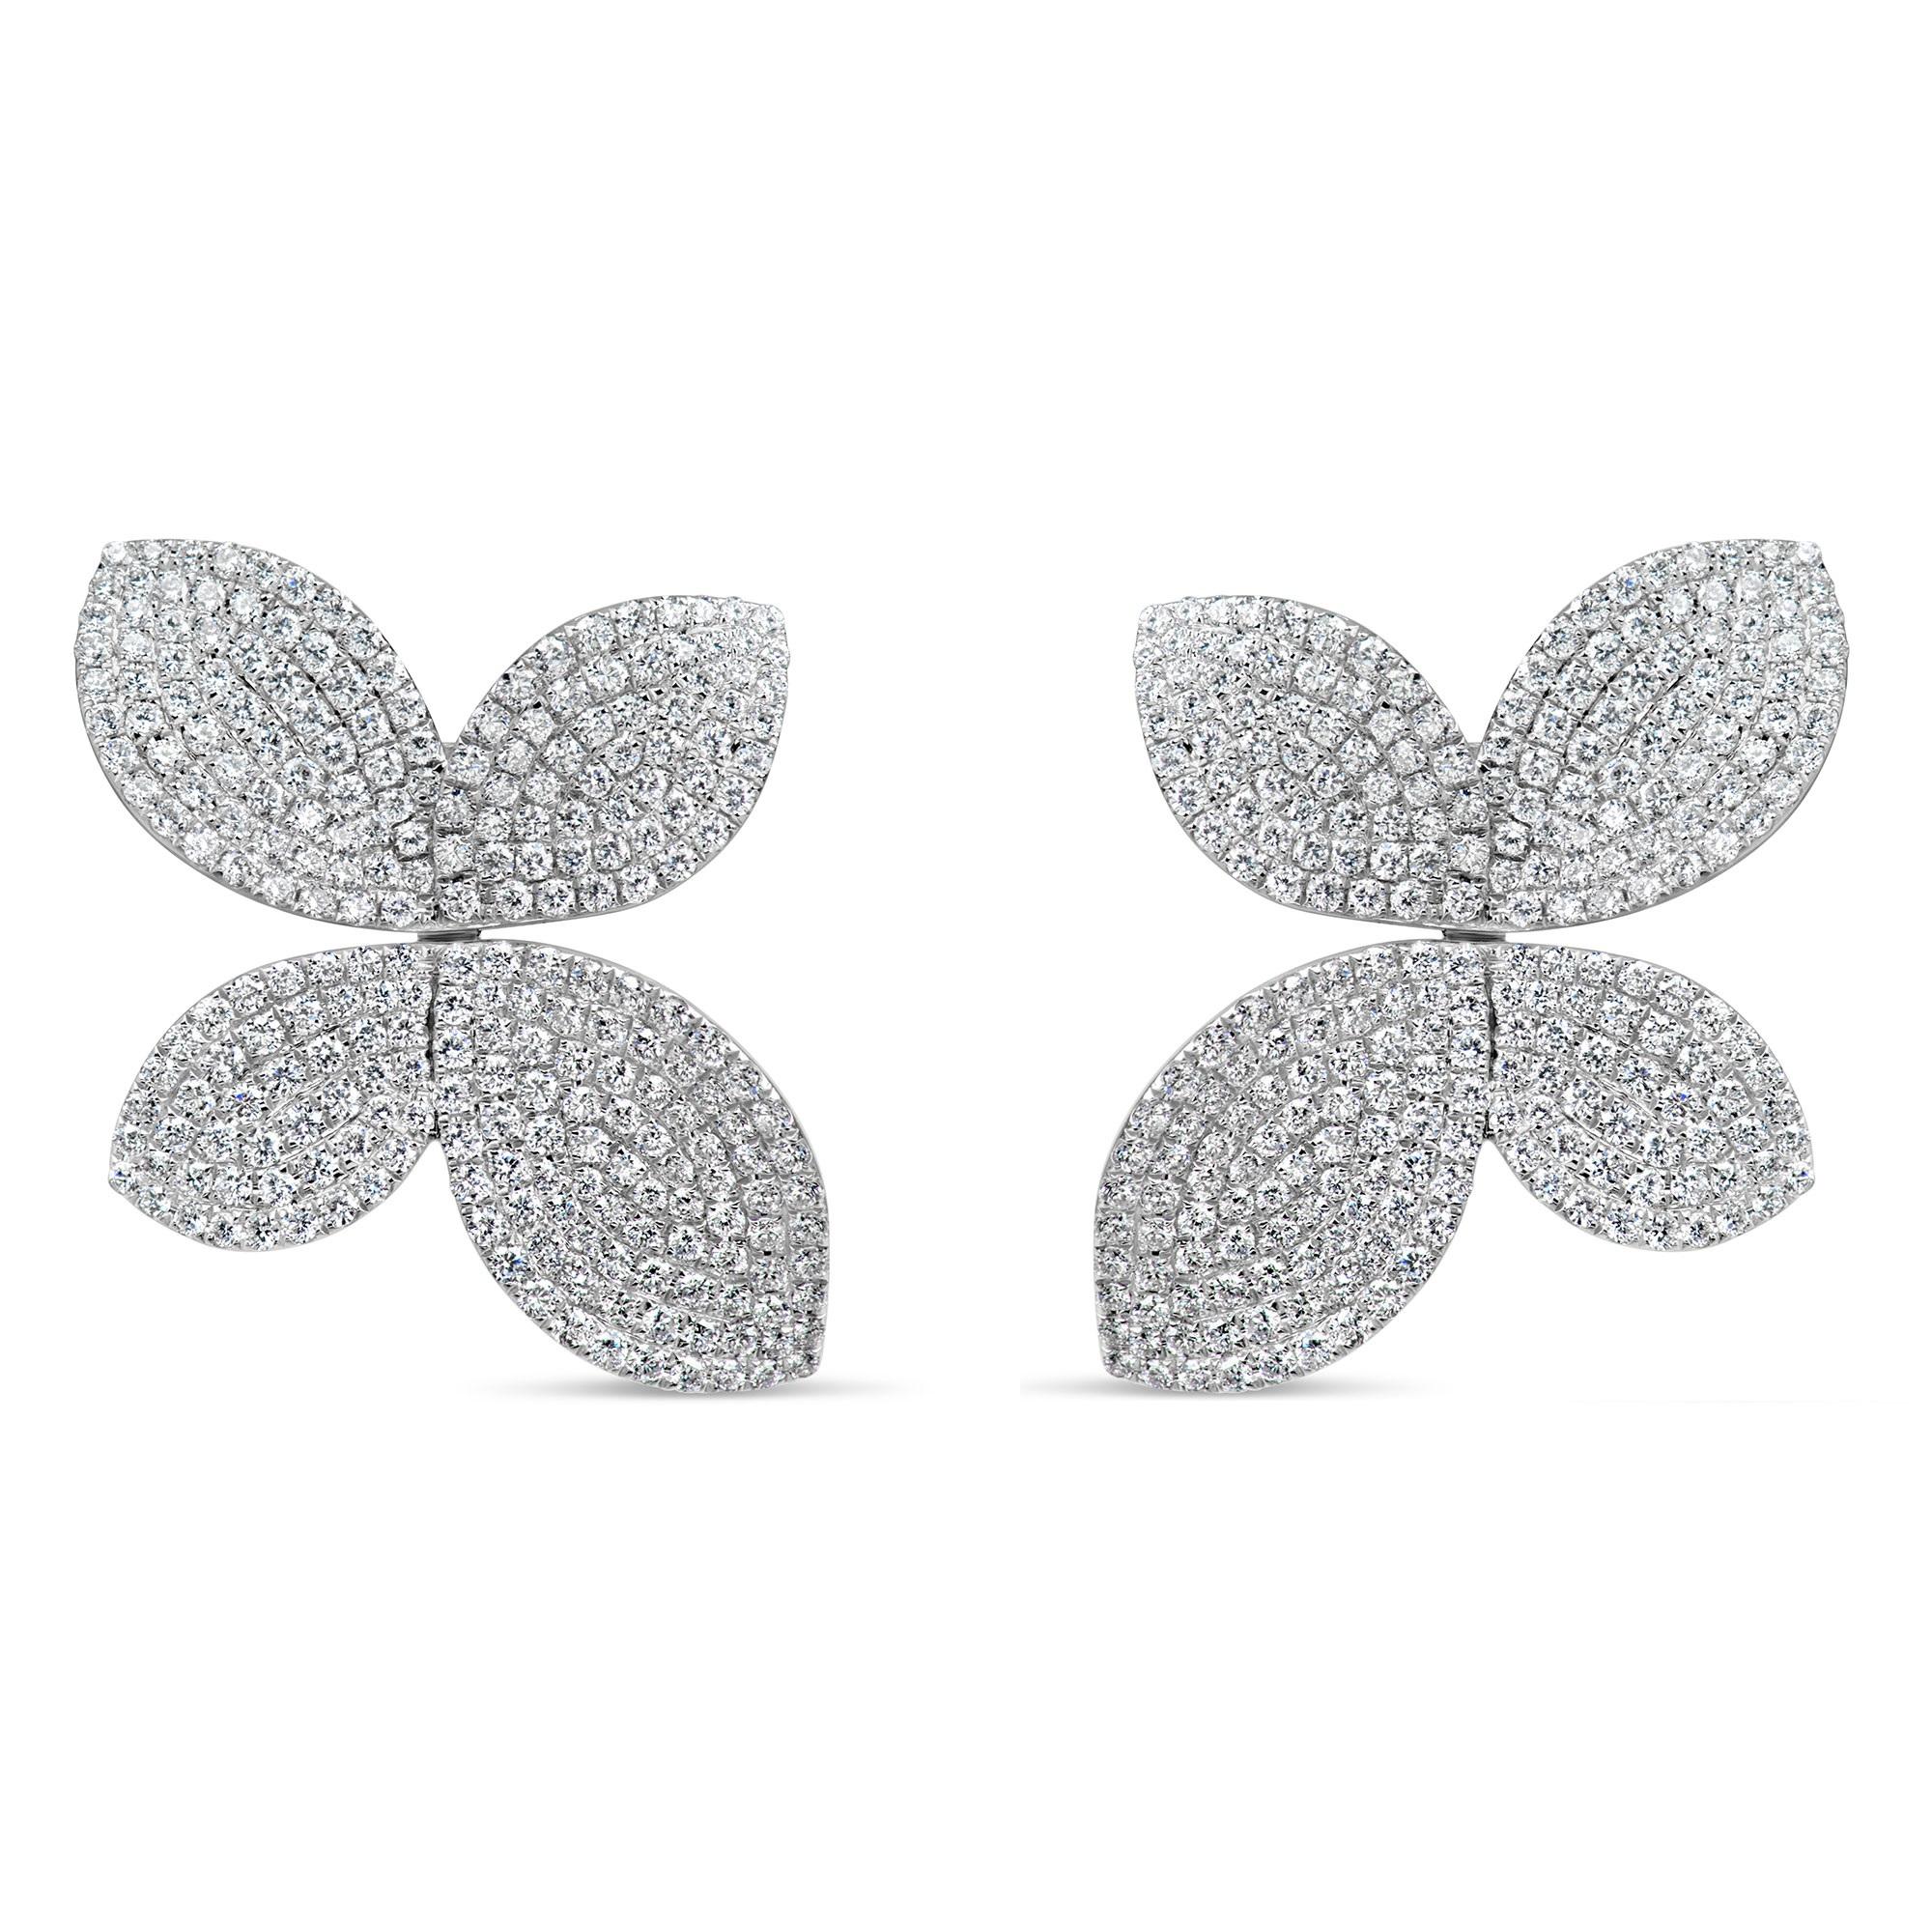 This Afarin Collection Pavé Garden Earrings Set boasts 18 kt White Gold and diamonds, imparting a timelessly elegant aesthetic.
This Collection is stunning!
676 Round Brilliant Cut Diamonds 2.78 cts t.w.  
F in Color  VS in Clarity
Excellent Make